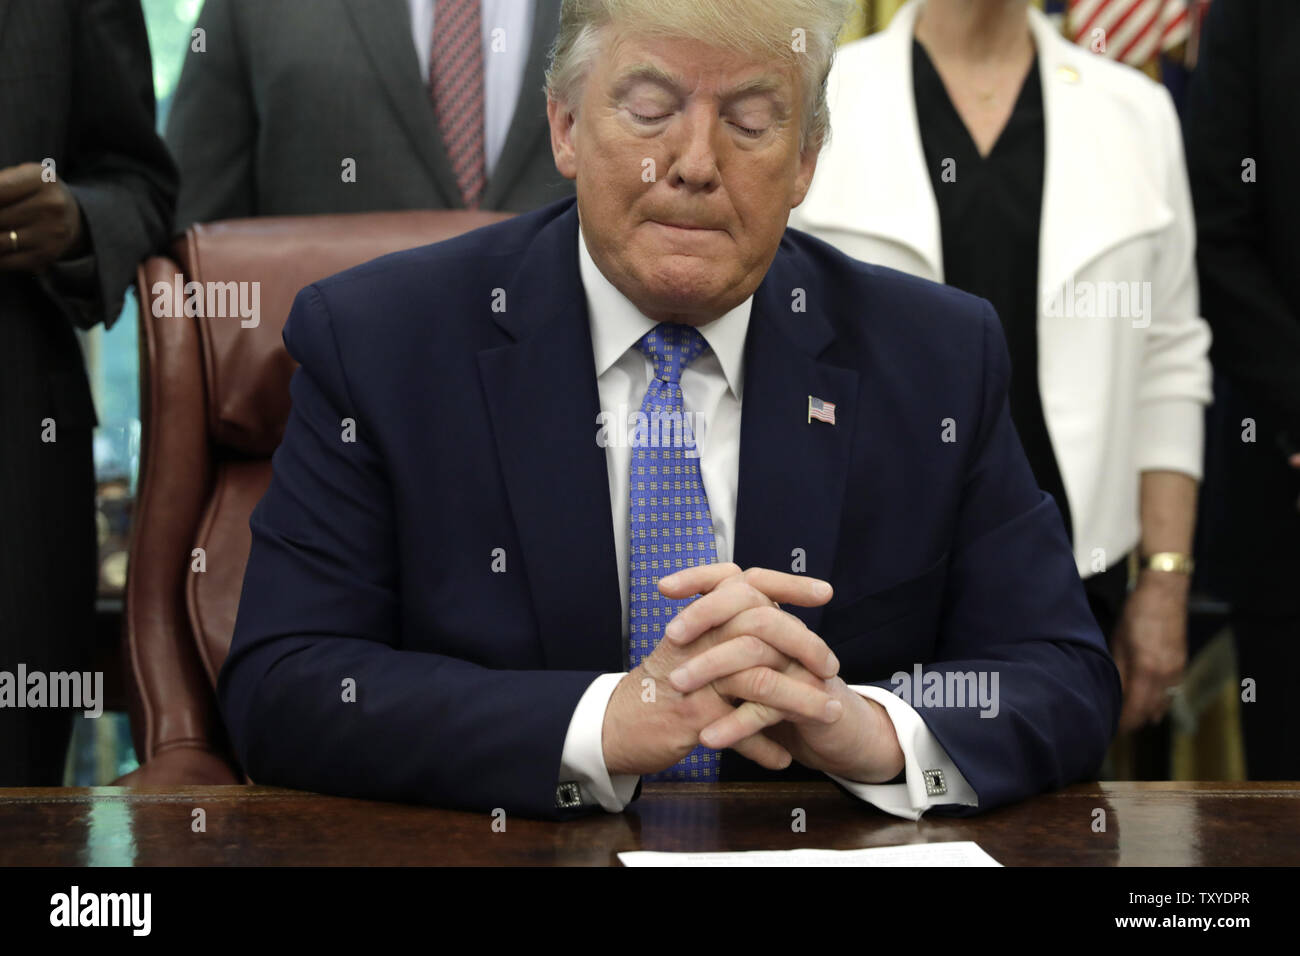 Washington, District of Columbia, USA. 25th June, 2019. US President Donald Trump pauses as he talks to the media after signing an Executive Order Establishing a White House Council on Eliminating Regulatory Barriers to Affordable Housing in the Oval Office at the White House in Washington, DC, on June 25, 2019 Credit: Yuri Gripas/CNP/ZUMA Wire/Alamy Live News Stock Photo